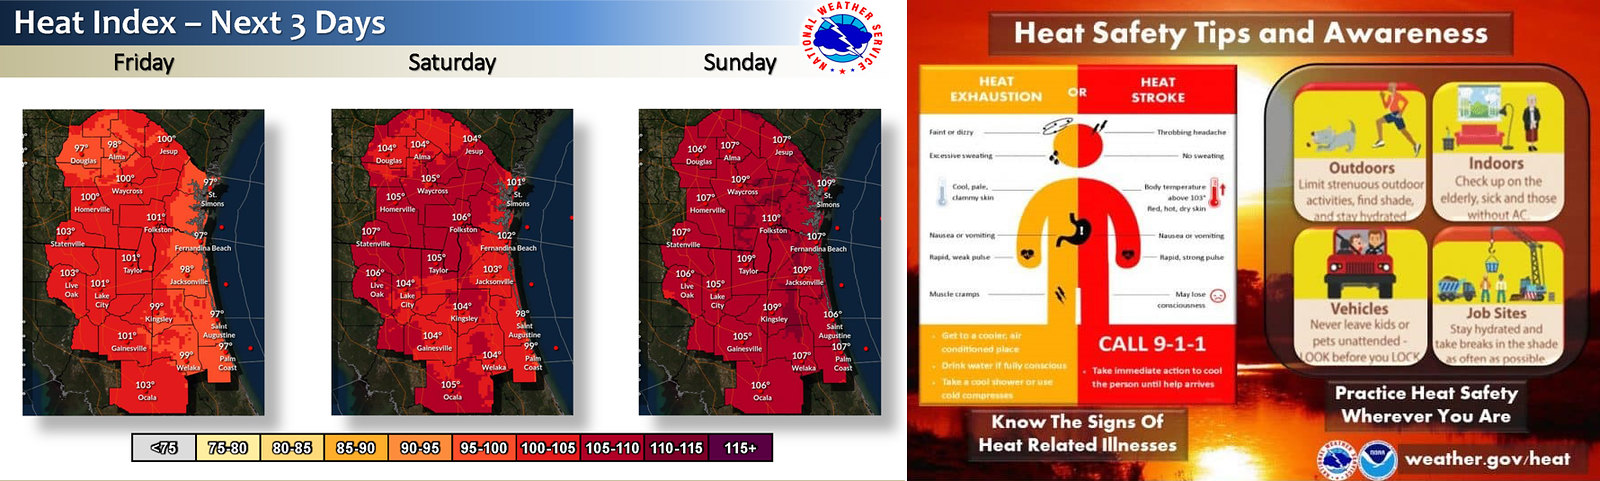 heat index and tips